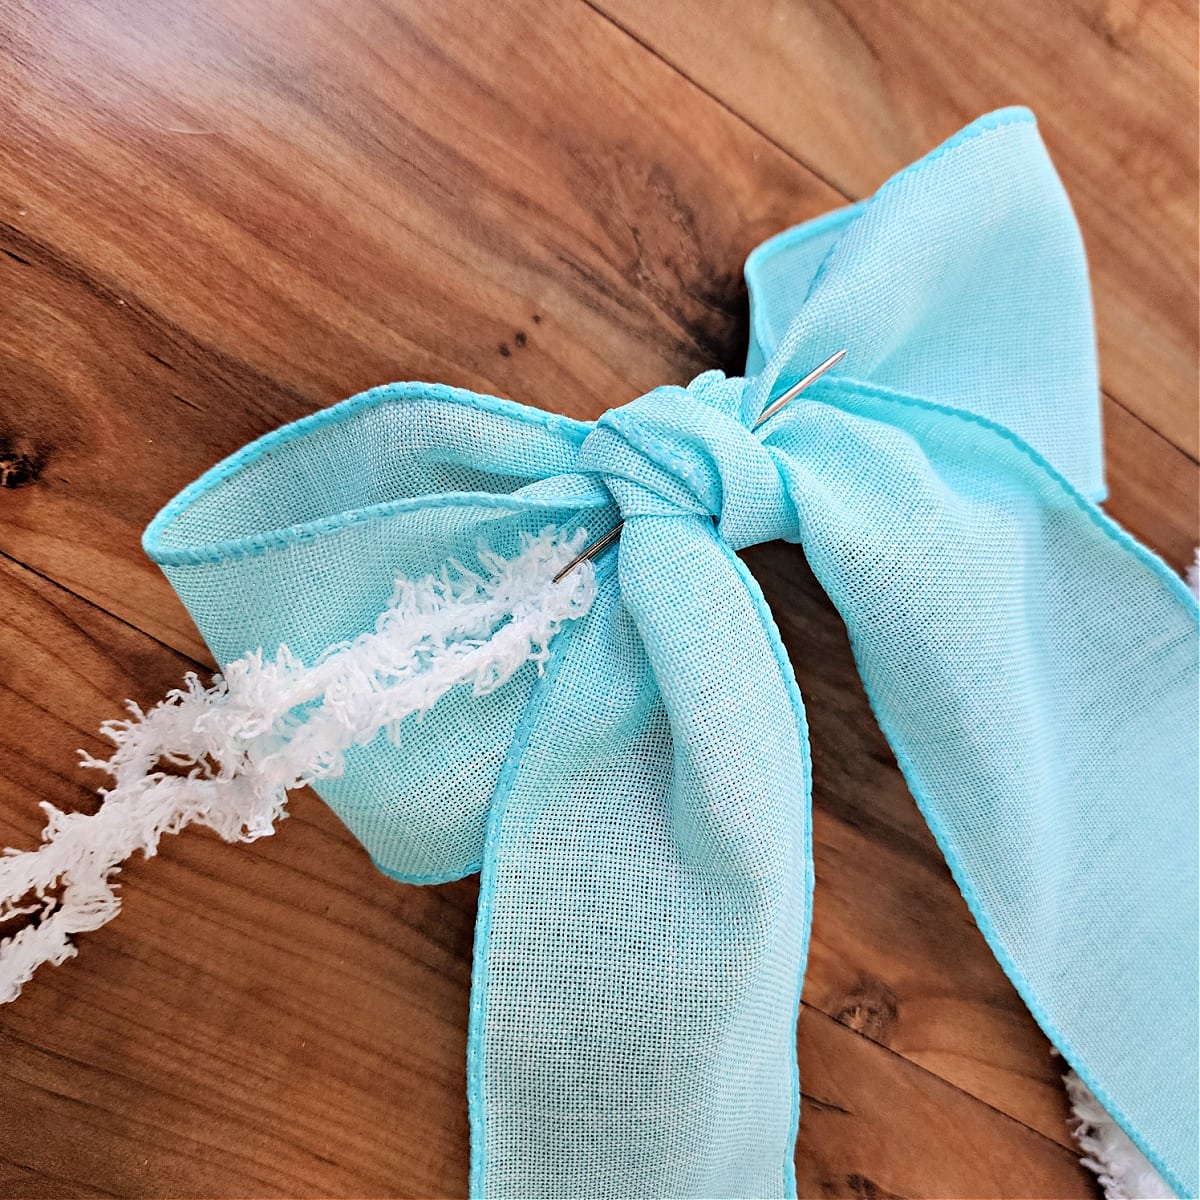 Light blue 2.5" wide dollar tree ribbon bow with yarn to attach to wreath.